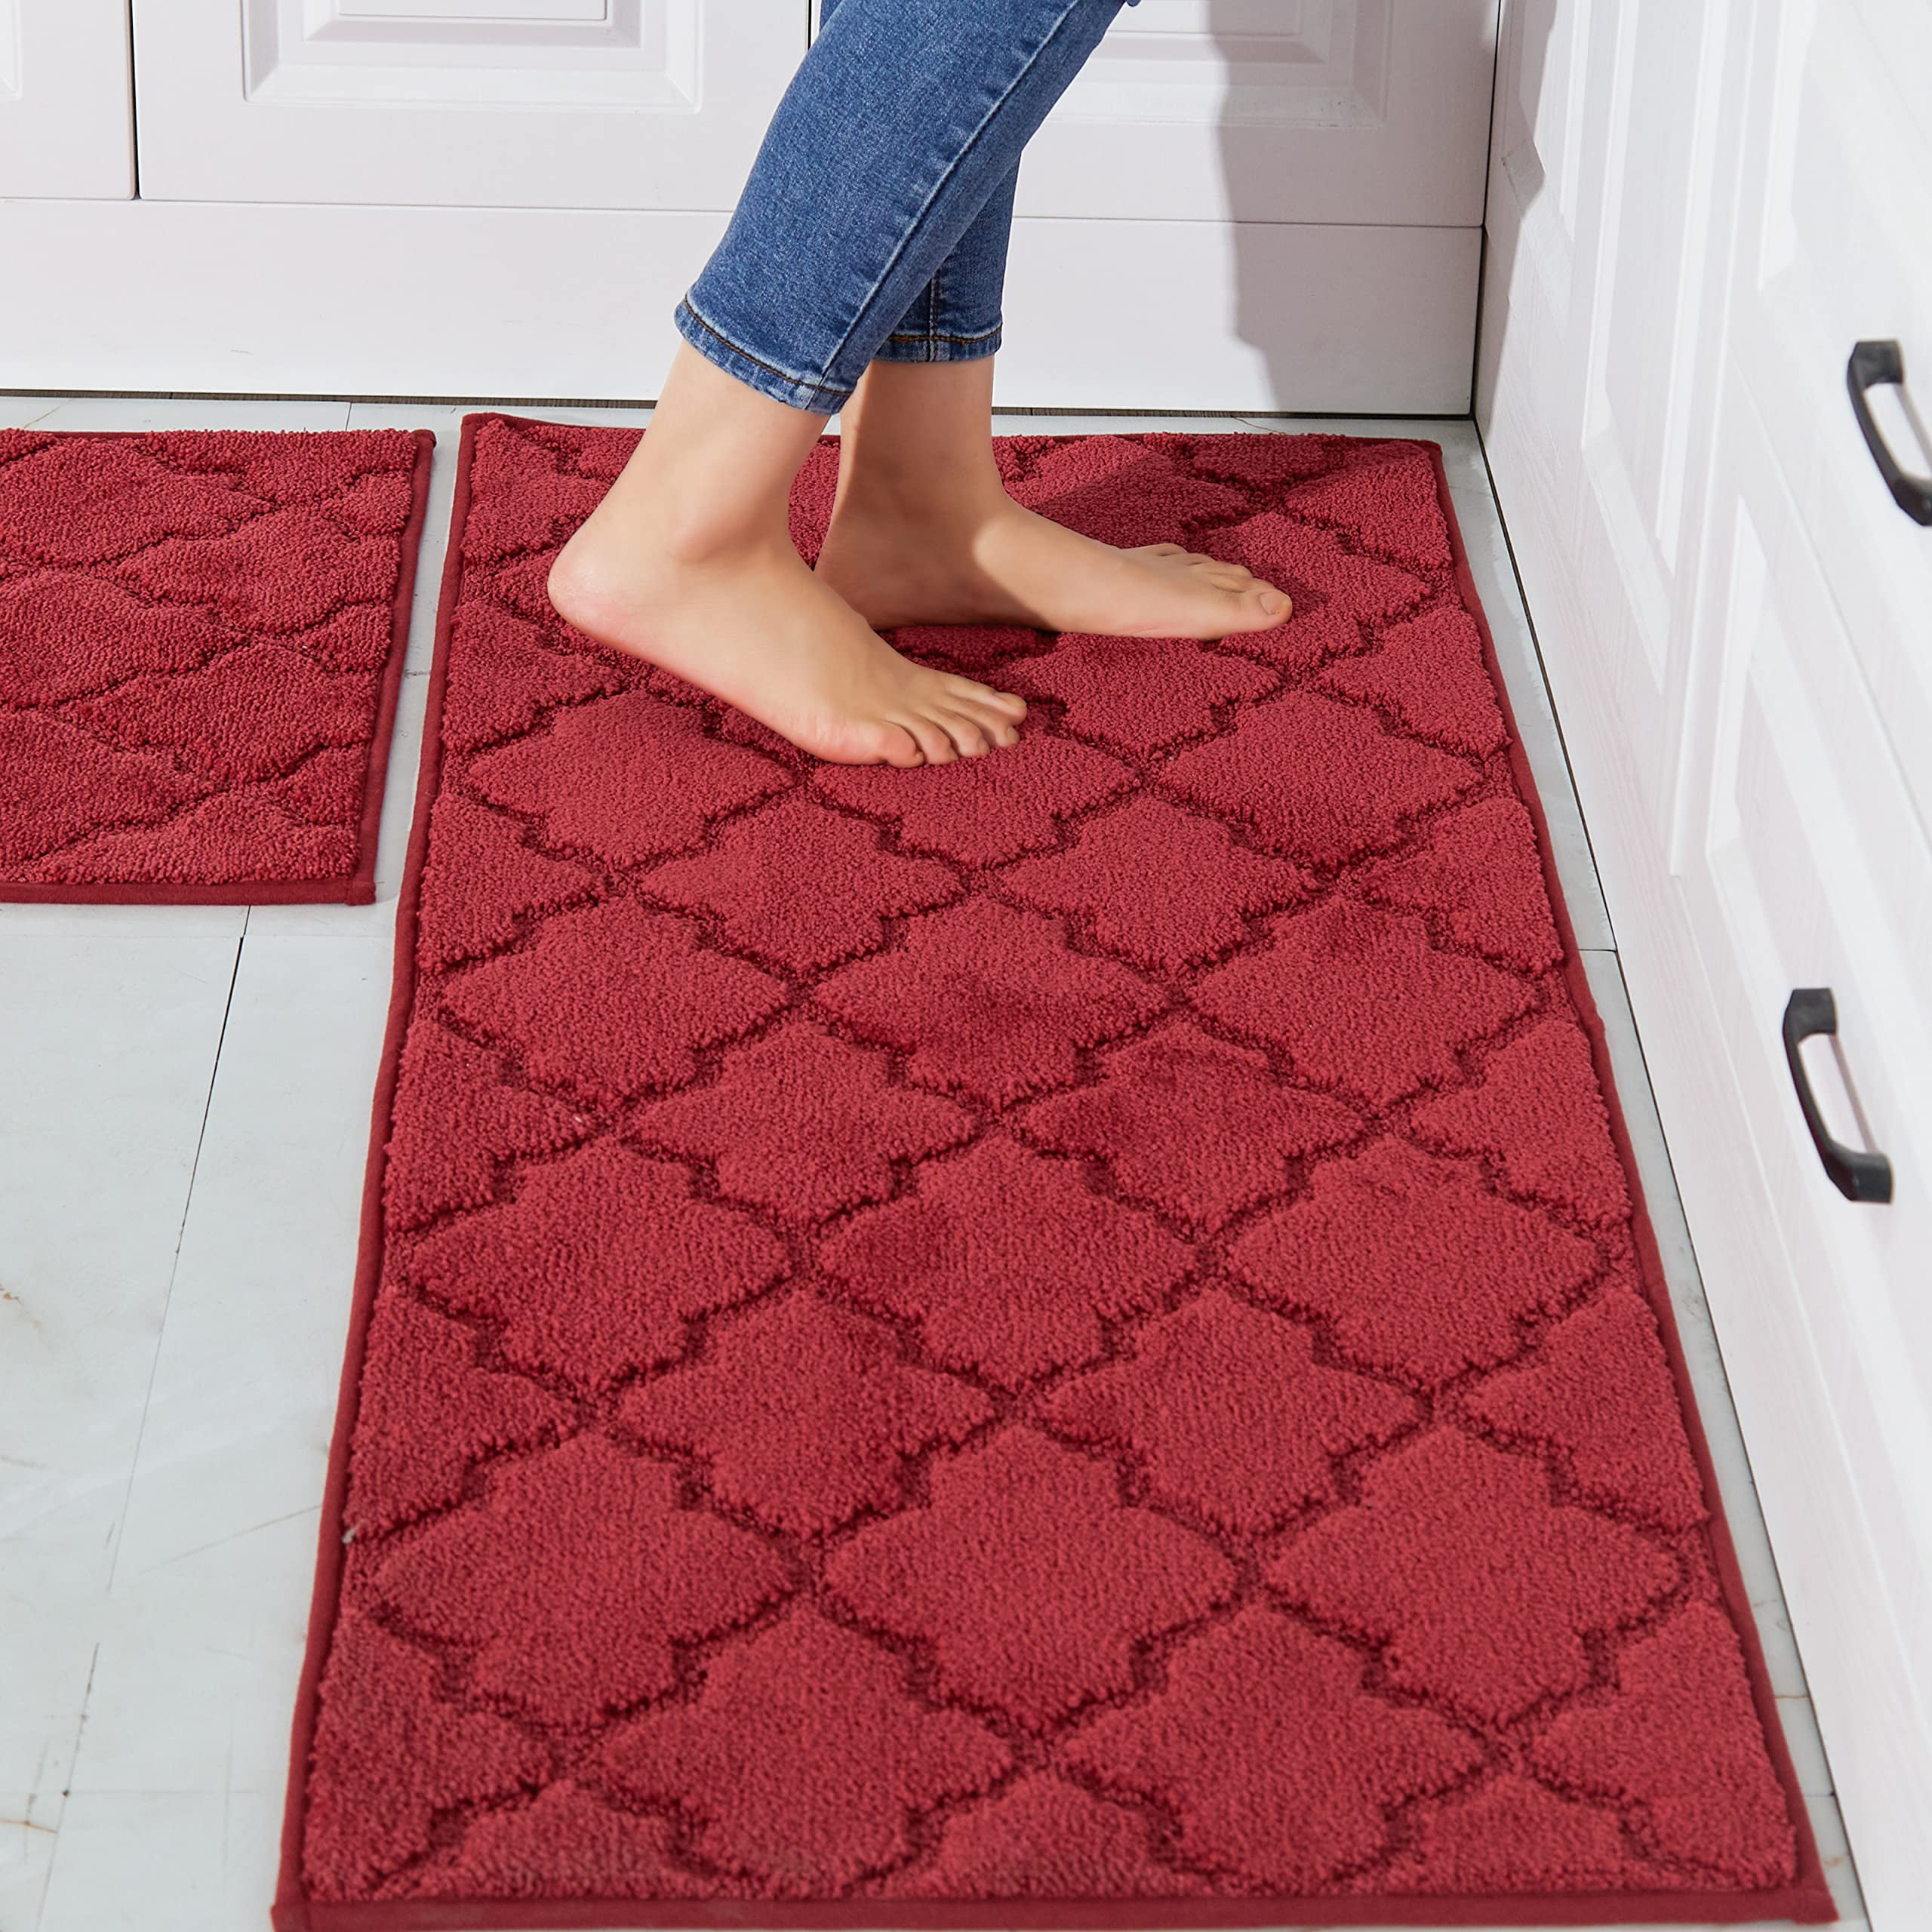 Sixhome Kitchen Rugs Mats Set of 2 Washable Absorbent Rugs for Kitchen Floor Non Skid Kitchen Mats in Front of Sink, 20 inchx32 inch+20 inchx48 inch